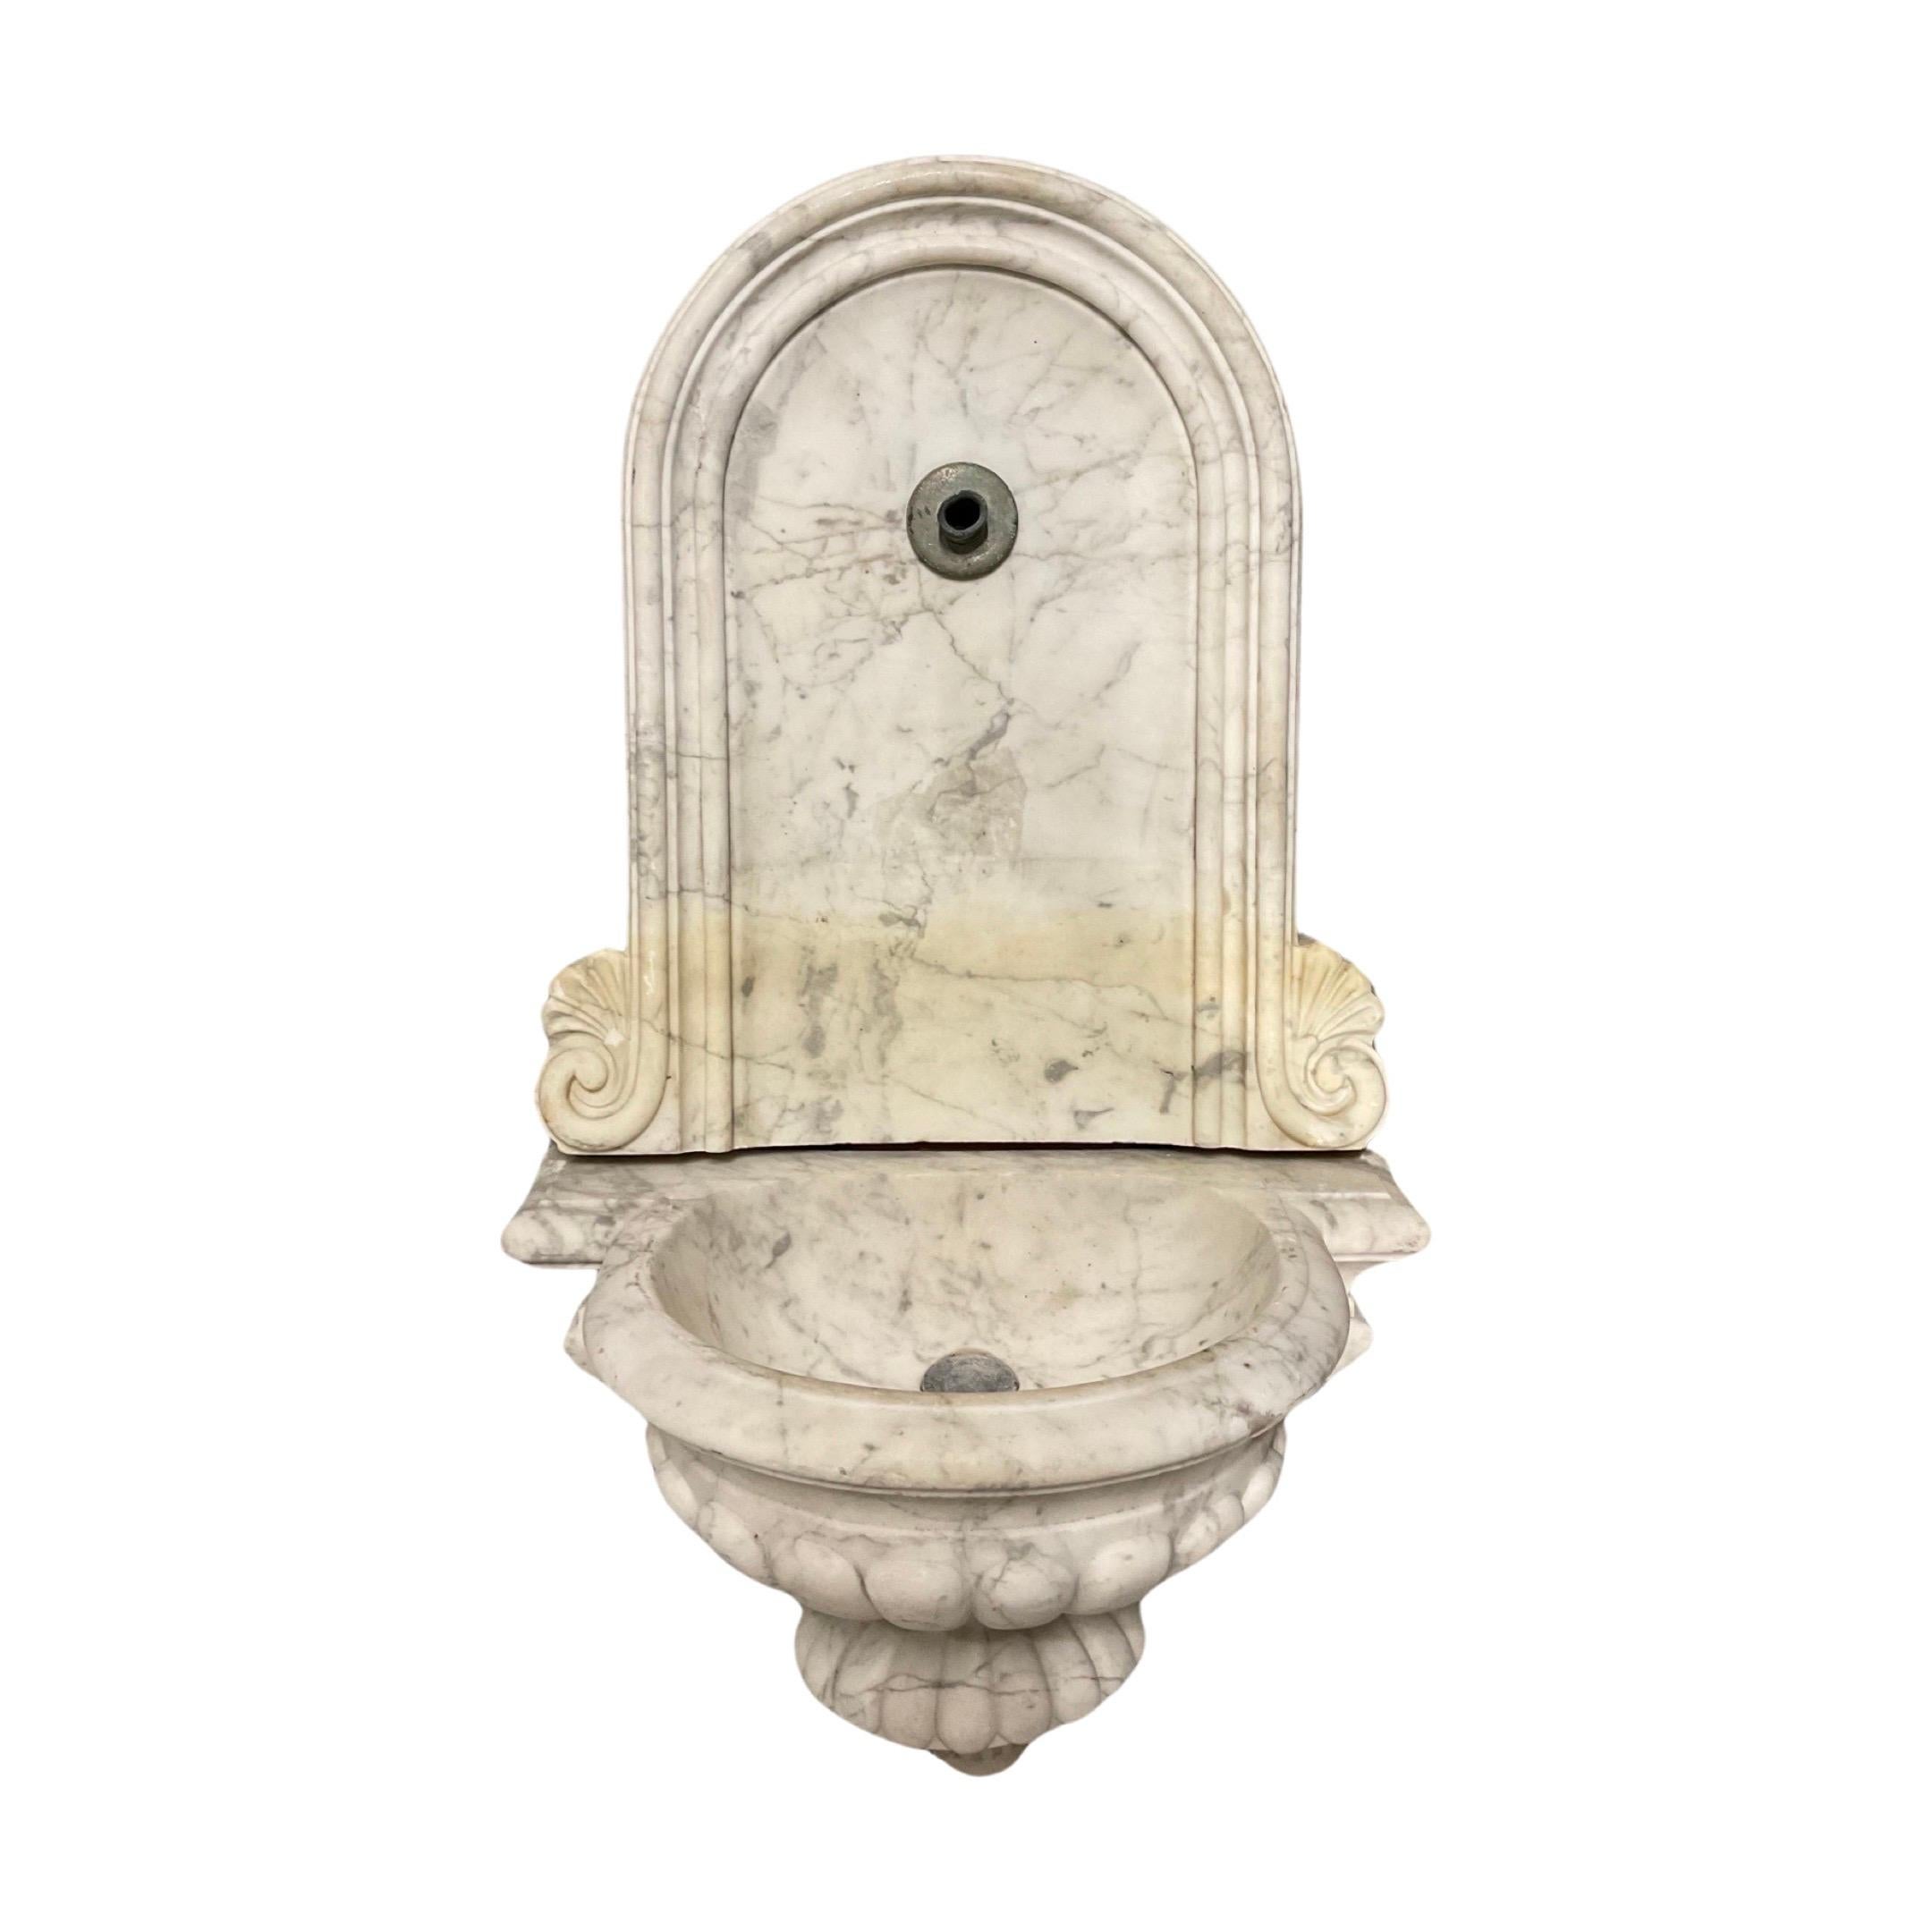 Enhance your space with a touch of elegance with our Italian White Veined Carrara Marble Wall Fountain. Handcrafted from the 18th century, this small wall fountain boasts luxurious white veined Carrara marble from Italy. Experience the beauty and